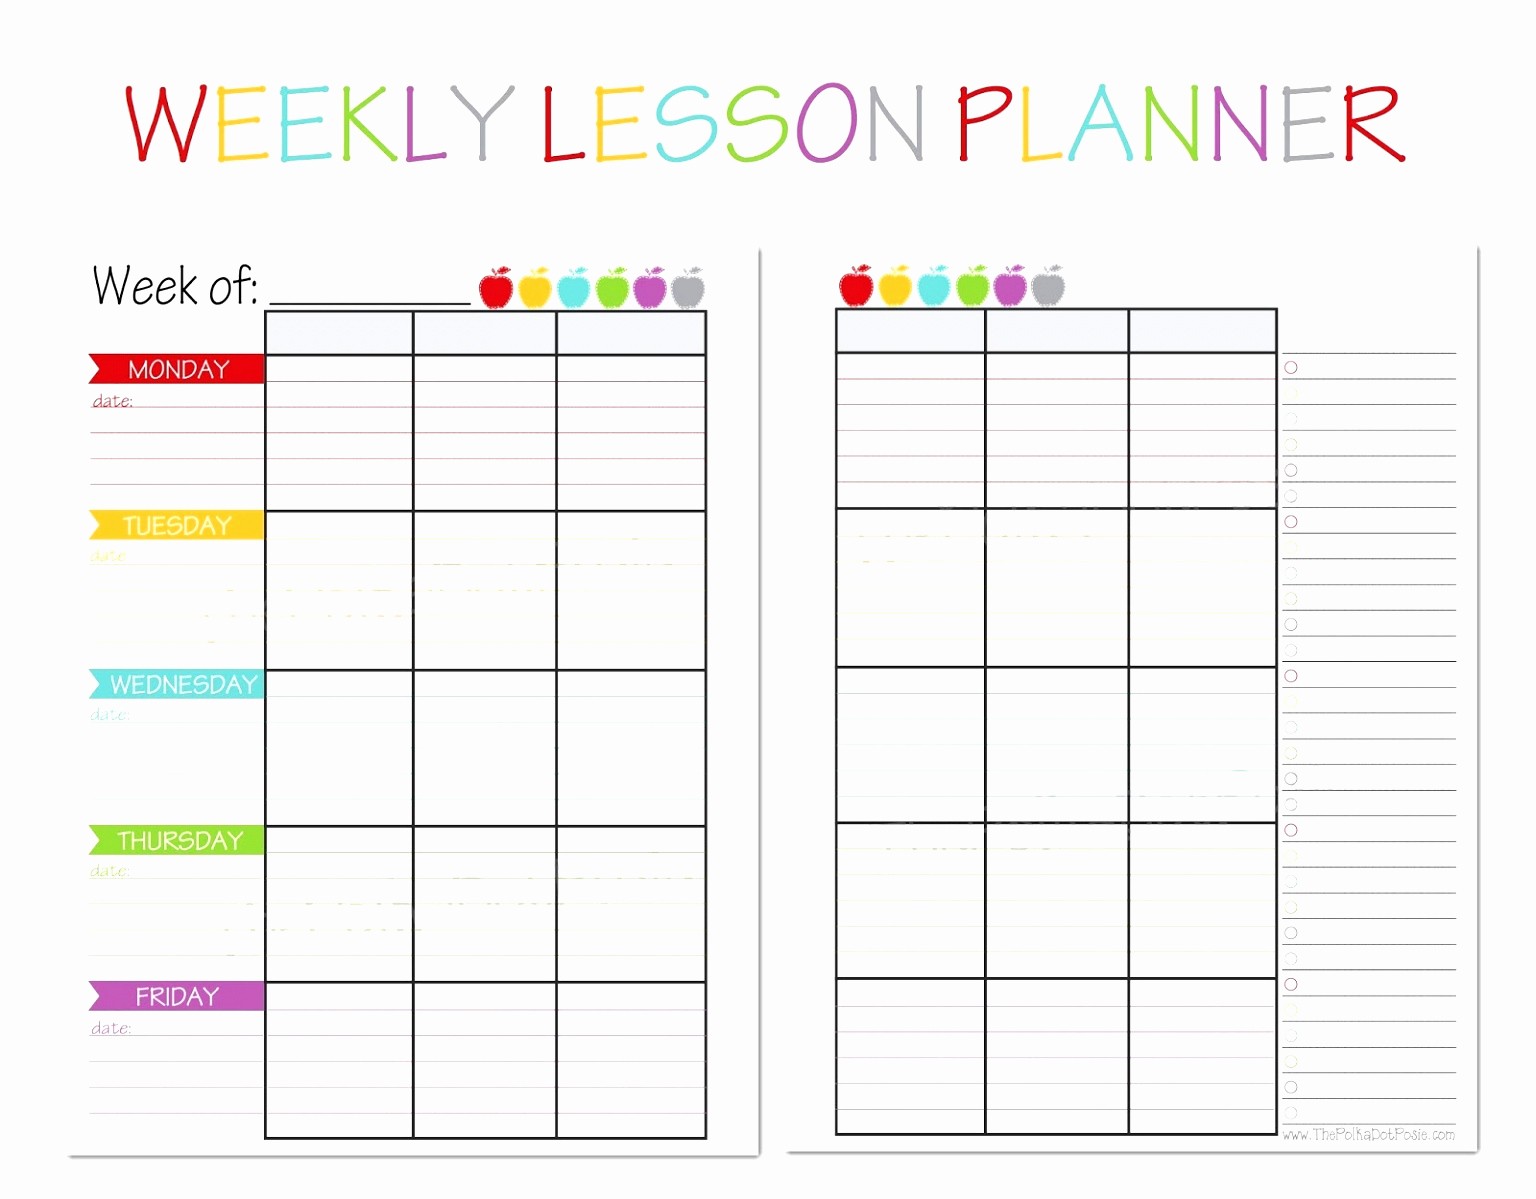 Weekly Lesson Plan Templates Free Fresh 10 Weekly Lesson Plan Templates for Elementary Teachers